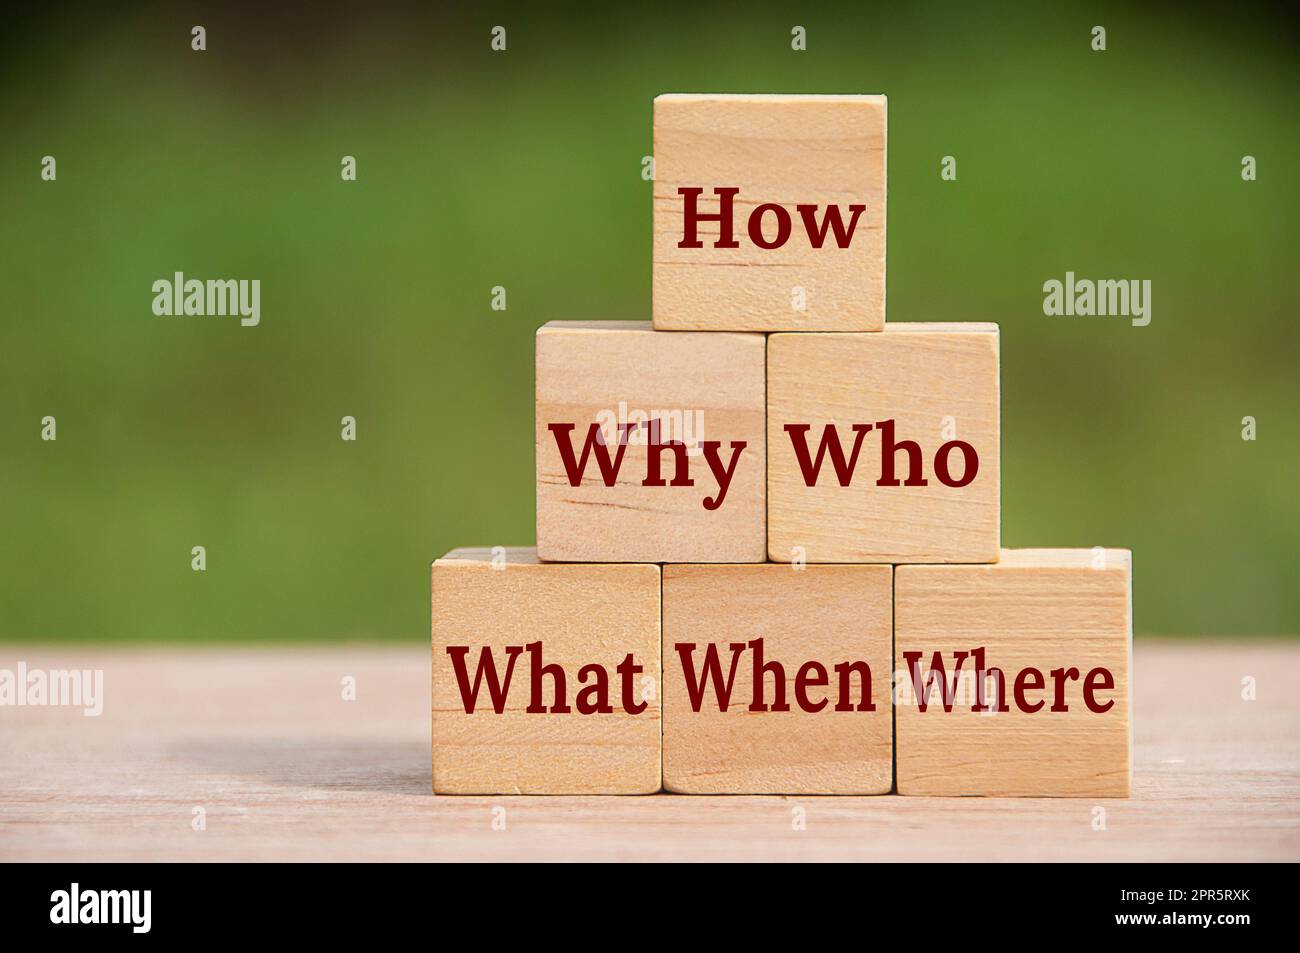 How, why, who, what, when and where text on wooden block with blurred nature background. Stock Photo